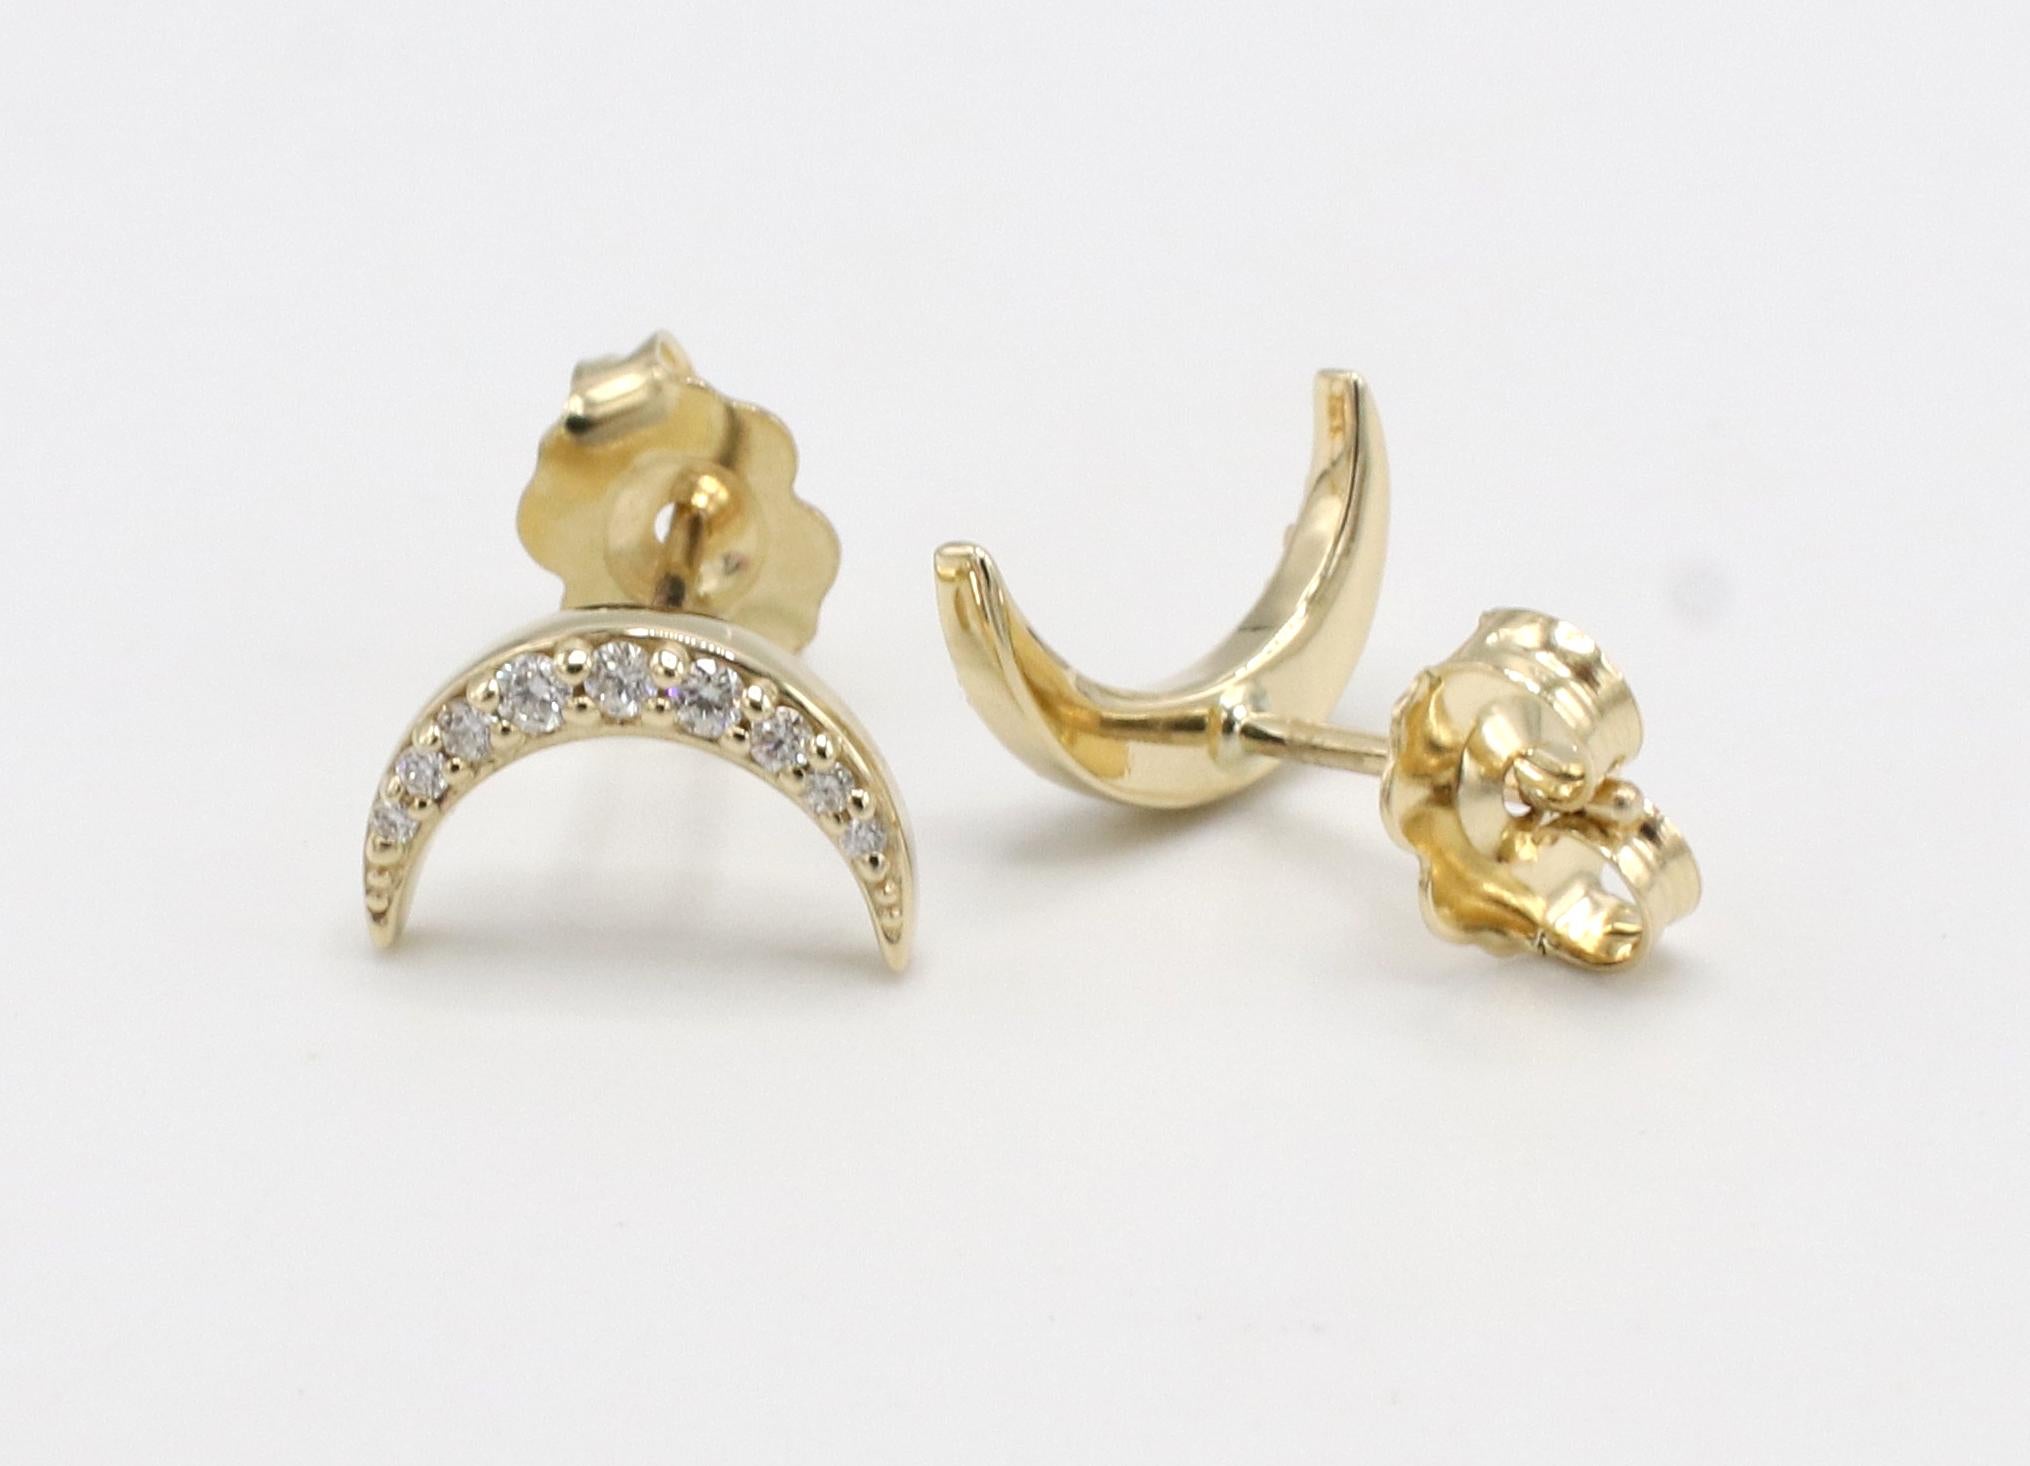 14 Karat Yellow Gold Natural Diamond Crescent Moon Stud Earrings 
Metal: 14k yellow gold
Weight: 1.31 grams
Diamonds: Approx. .10 CTW natural round diamonds H-I SI
Dimensions: 9.5 x 2mm
Backs: Push backs with posts
